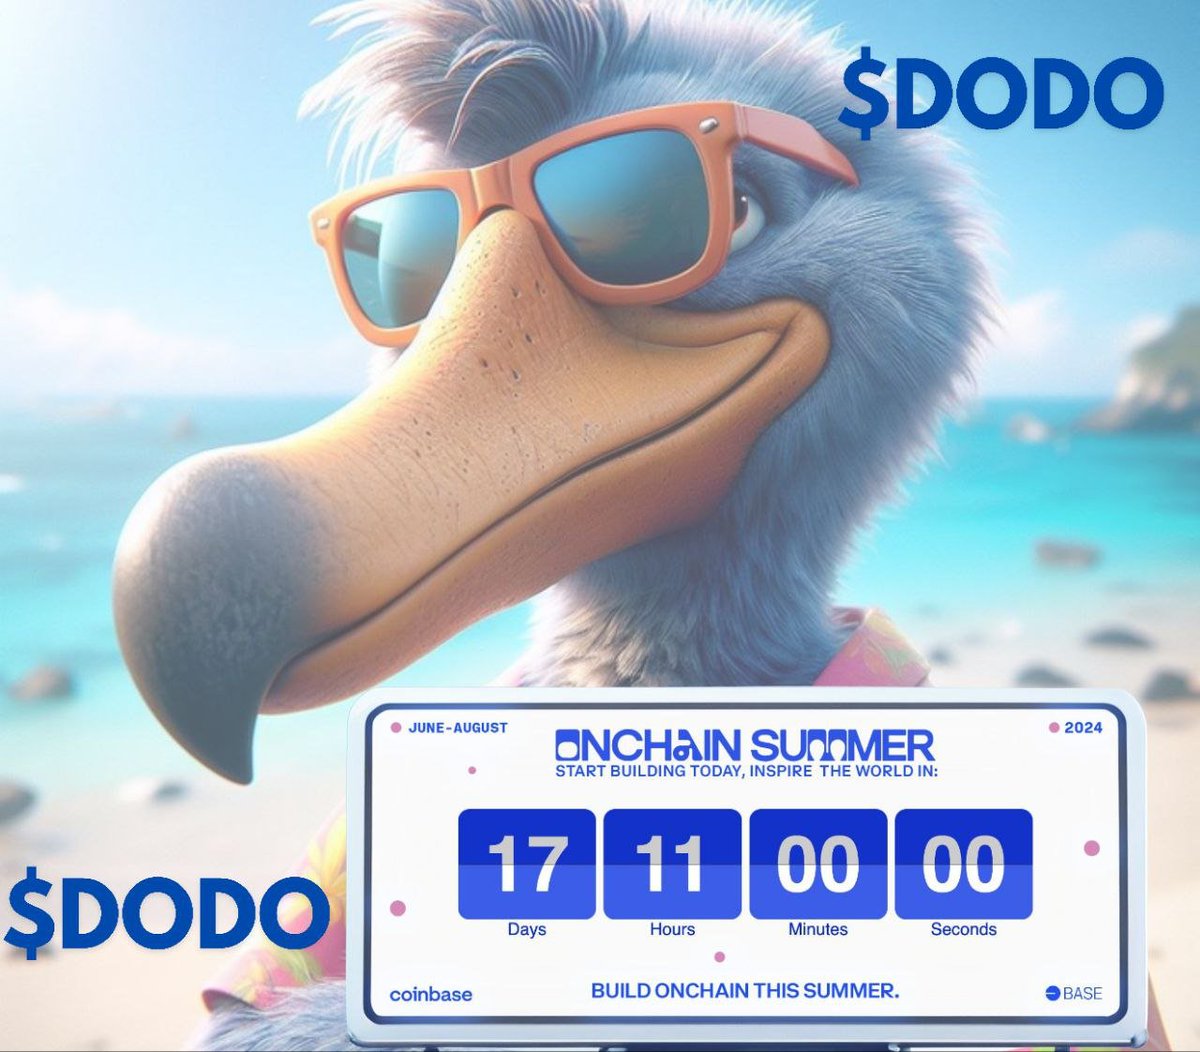 Hello Bird lovers and #Base enthusiasts

#Base #Onchain is coming  $Dodo @base 

 t.me/DodoOnBase - Join the flock!